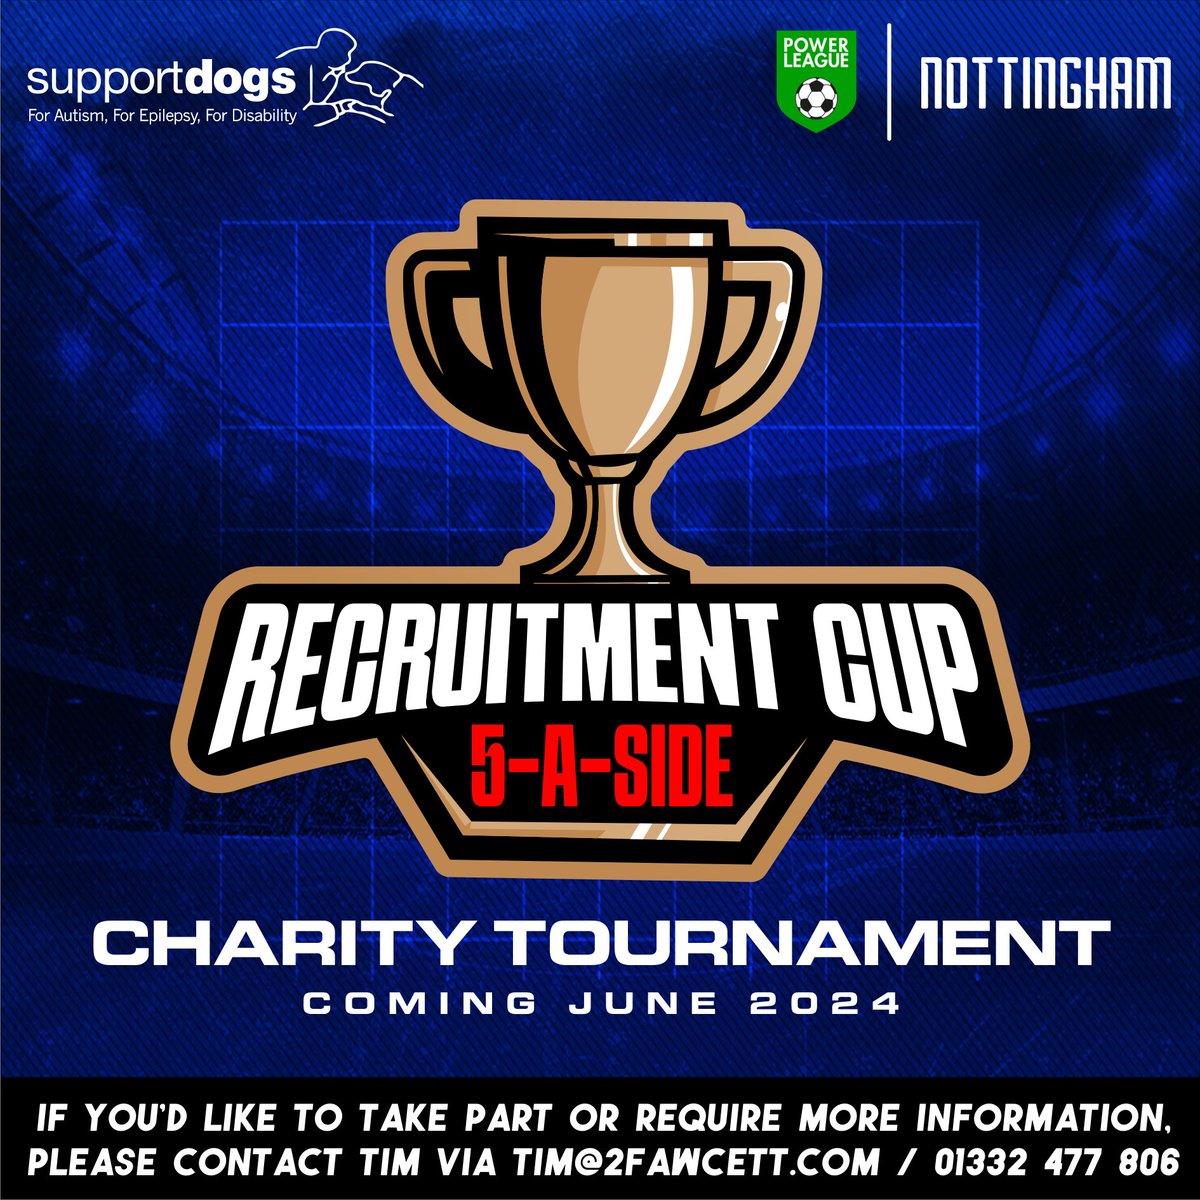 RECRUITERS WE NEED YOU!!! ⚽️🏆 This Summer ahead of Euro 2024, @powerleagueUK Nottingham are hosting the Recruitment Cup - a charity 5-a-side football tournament solely for Recruitment Agencies, all in aid of @supportdogsuk . To enter or for more information, please DM us! ☎️📨